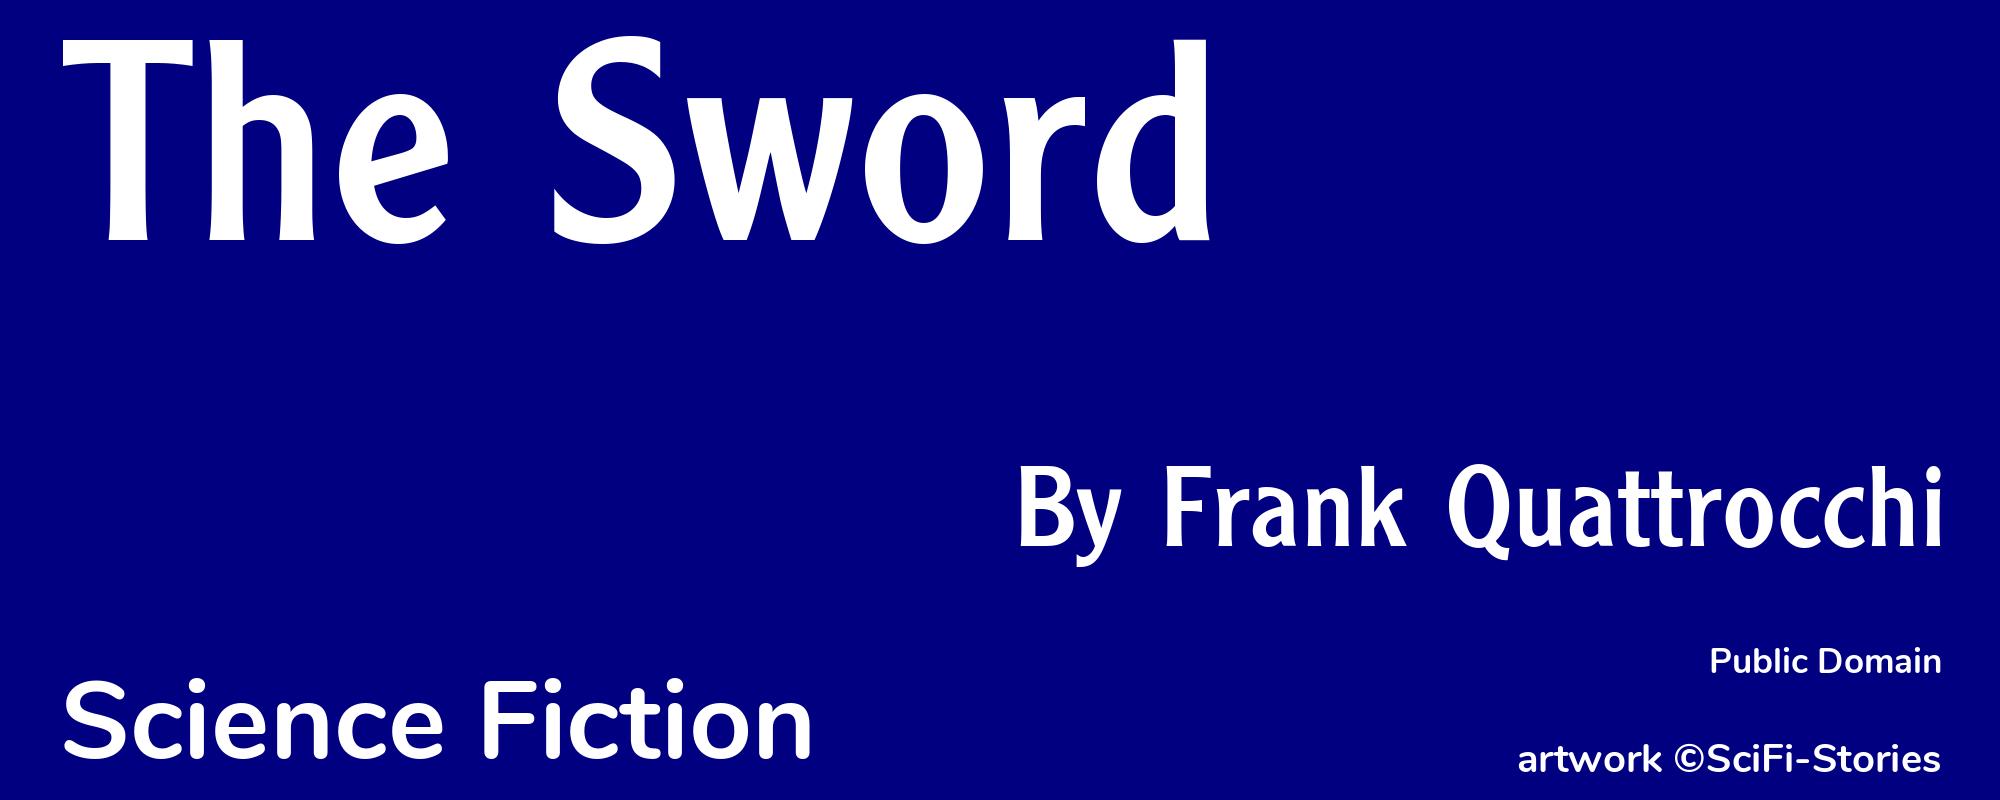 The Sword - Cover